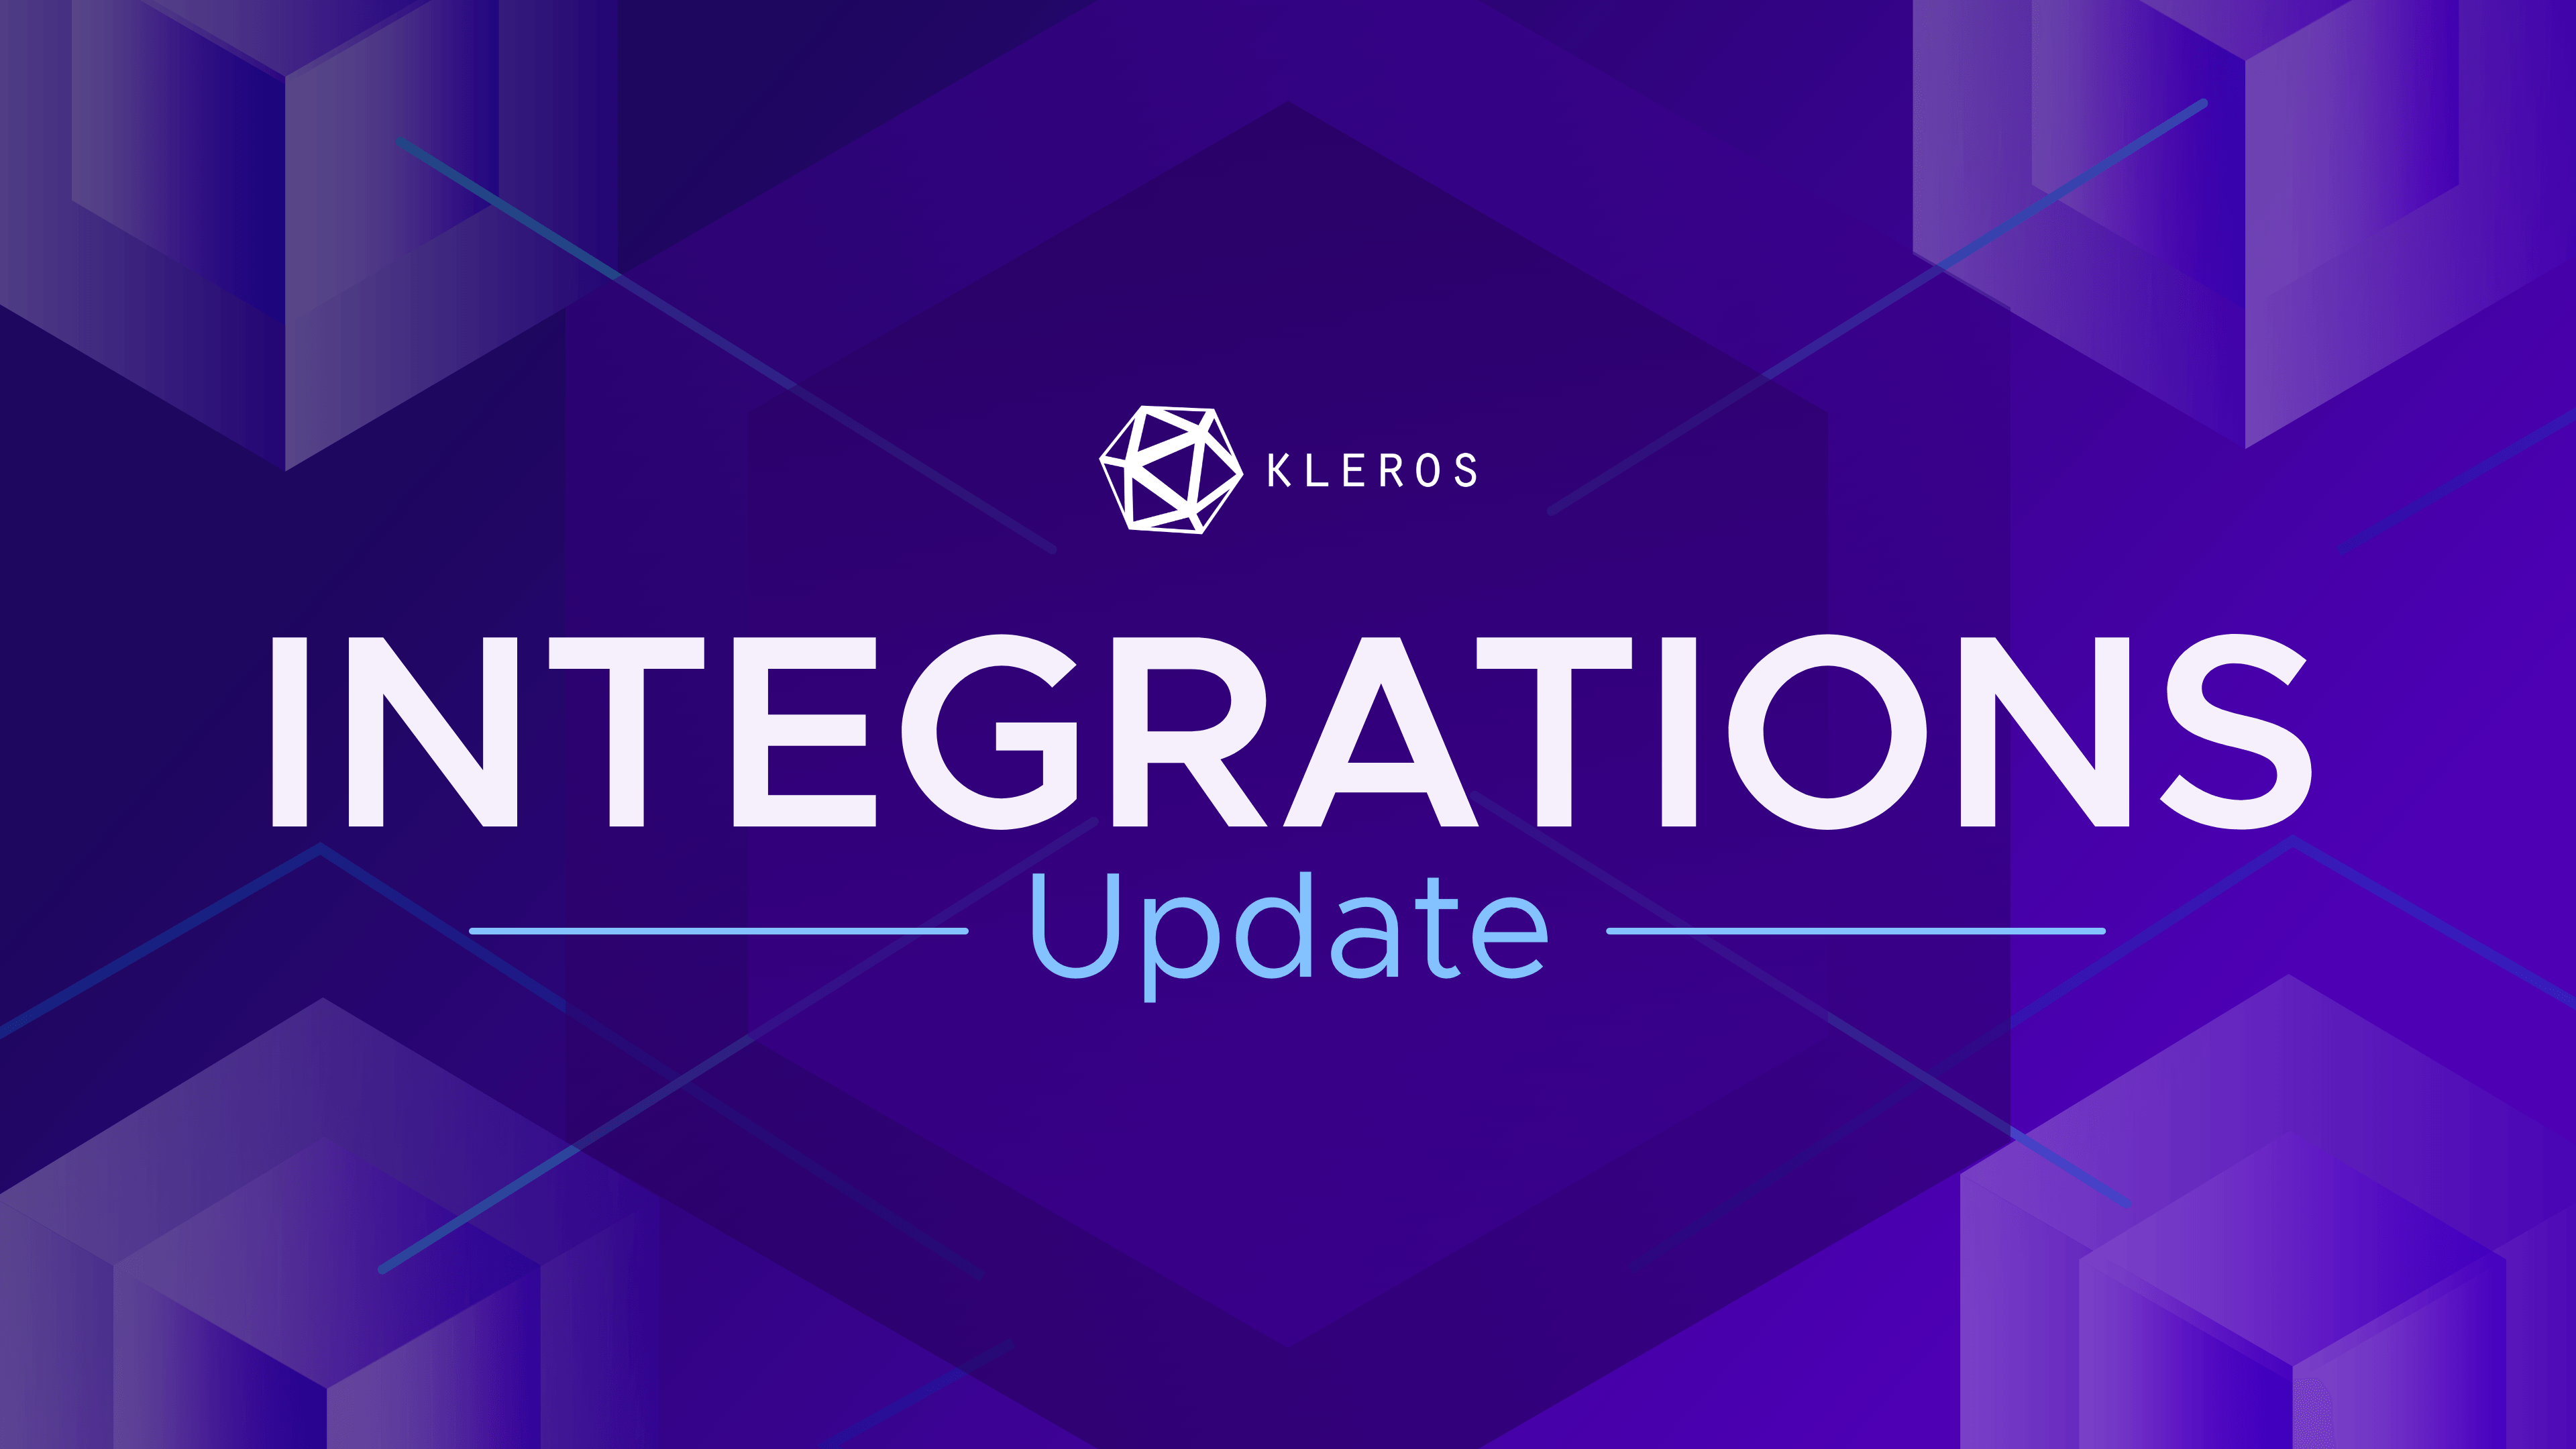 Kleros Update - Integrations and what's coming with V2